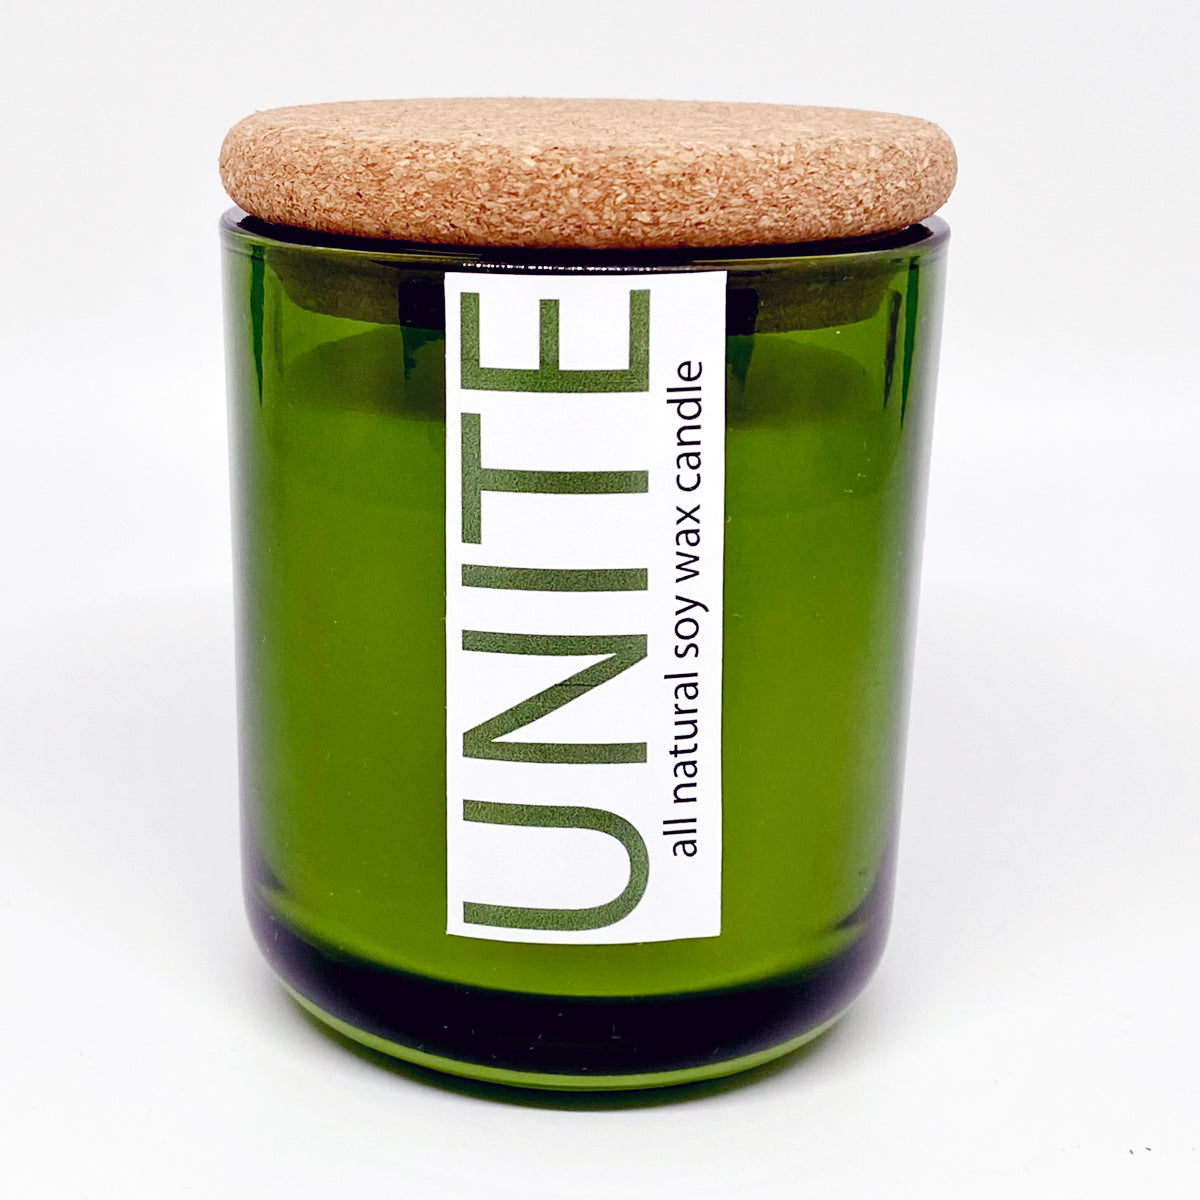 UNITE Soy Wax Candle Fundraiser